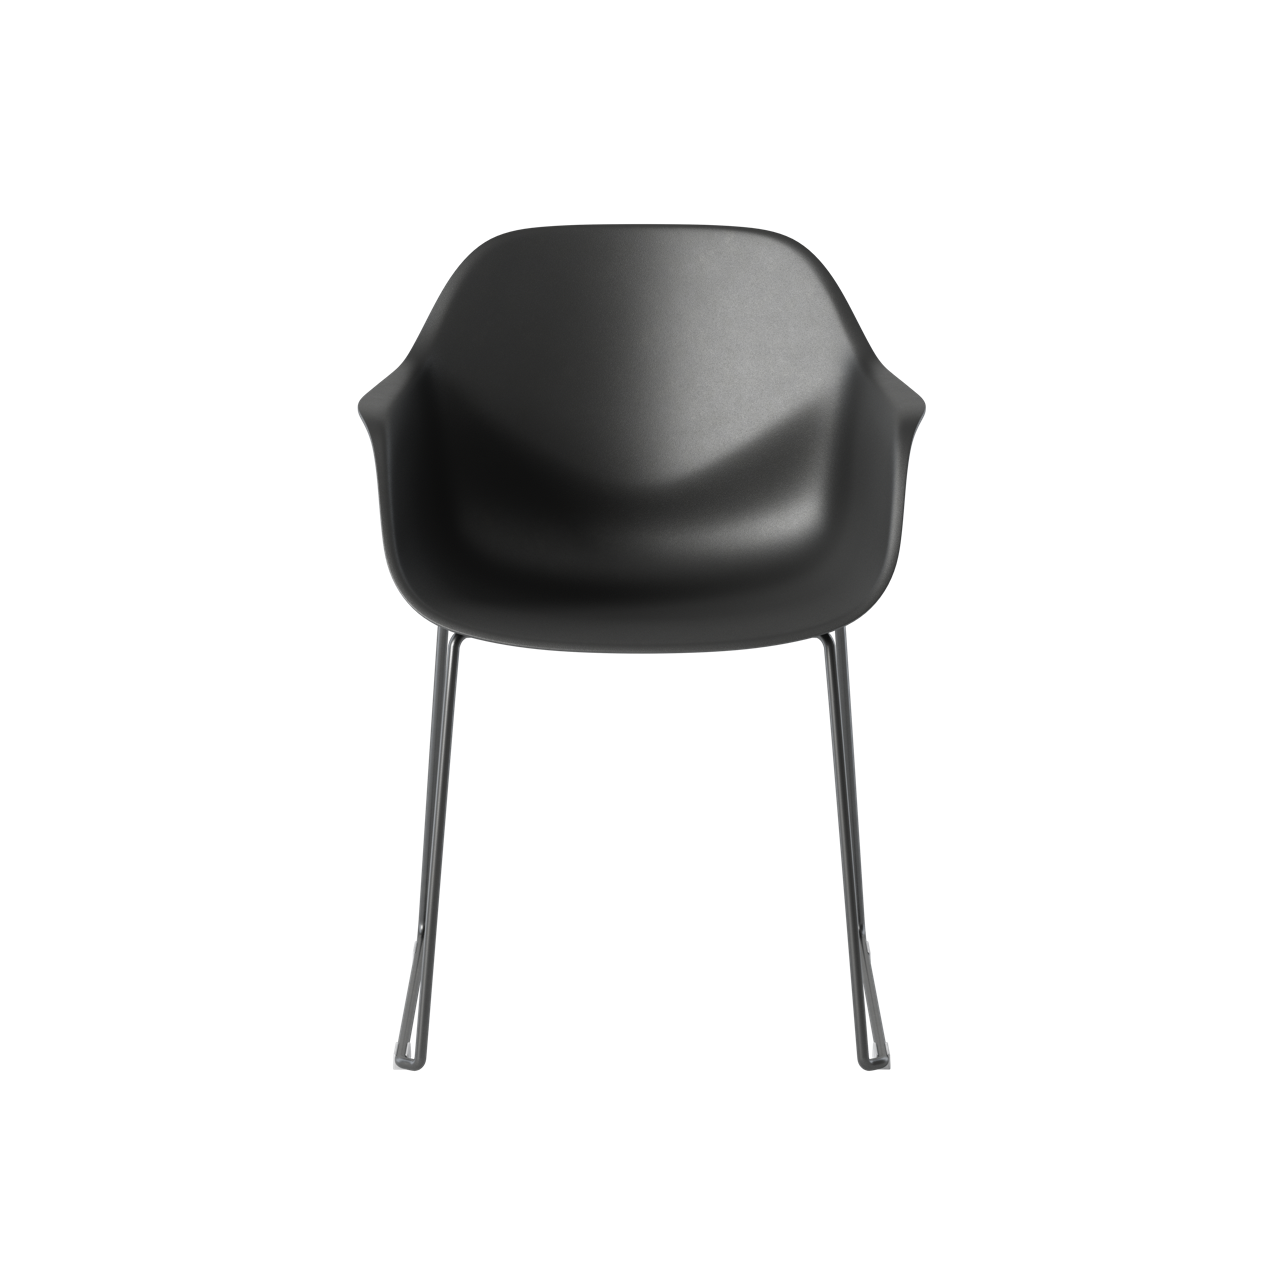 OCEE&FOUR – Chairs – FourMe 88 – Plastic shell - Skid Frame - Packshot Image 2 Large